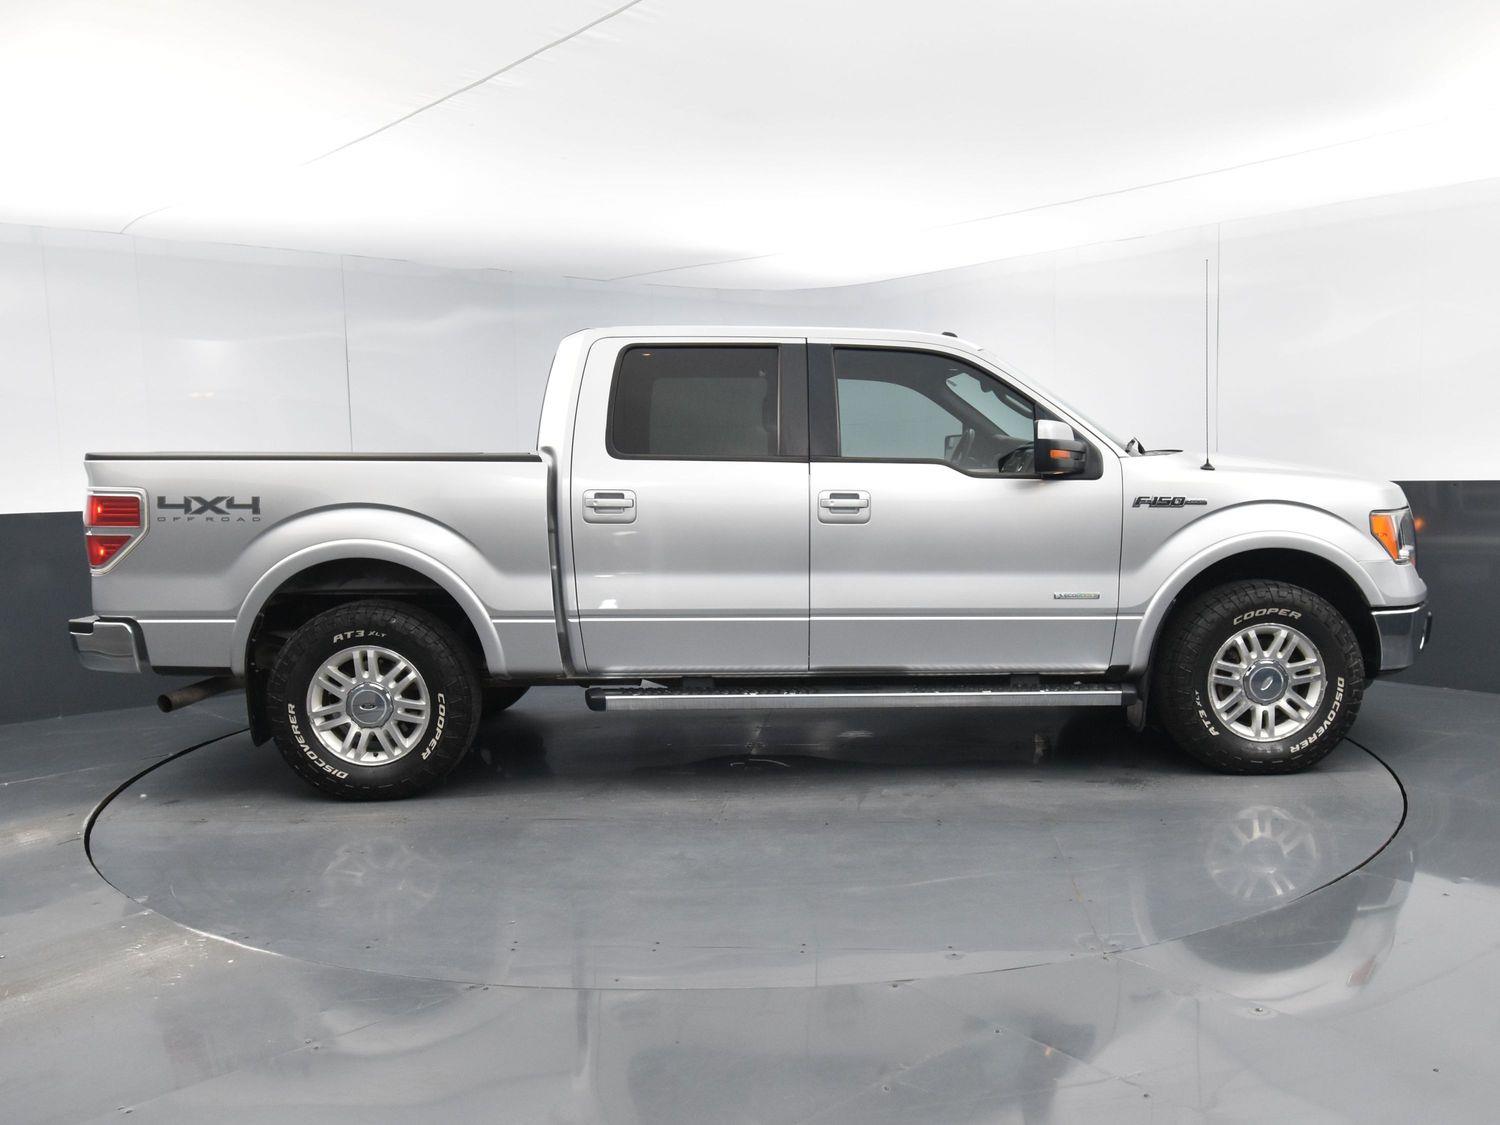 Used 2011 Ford F-150 Lariat Crew Cab Pickup for sale in Grand Island NE